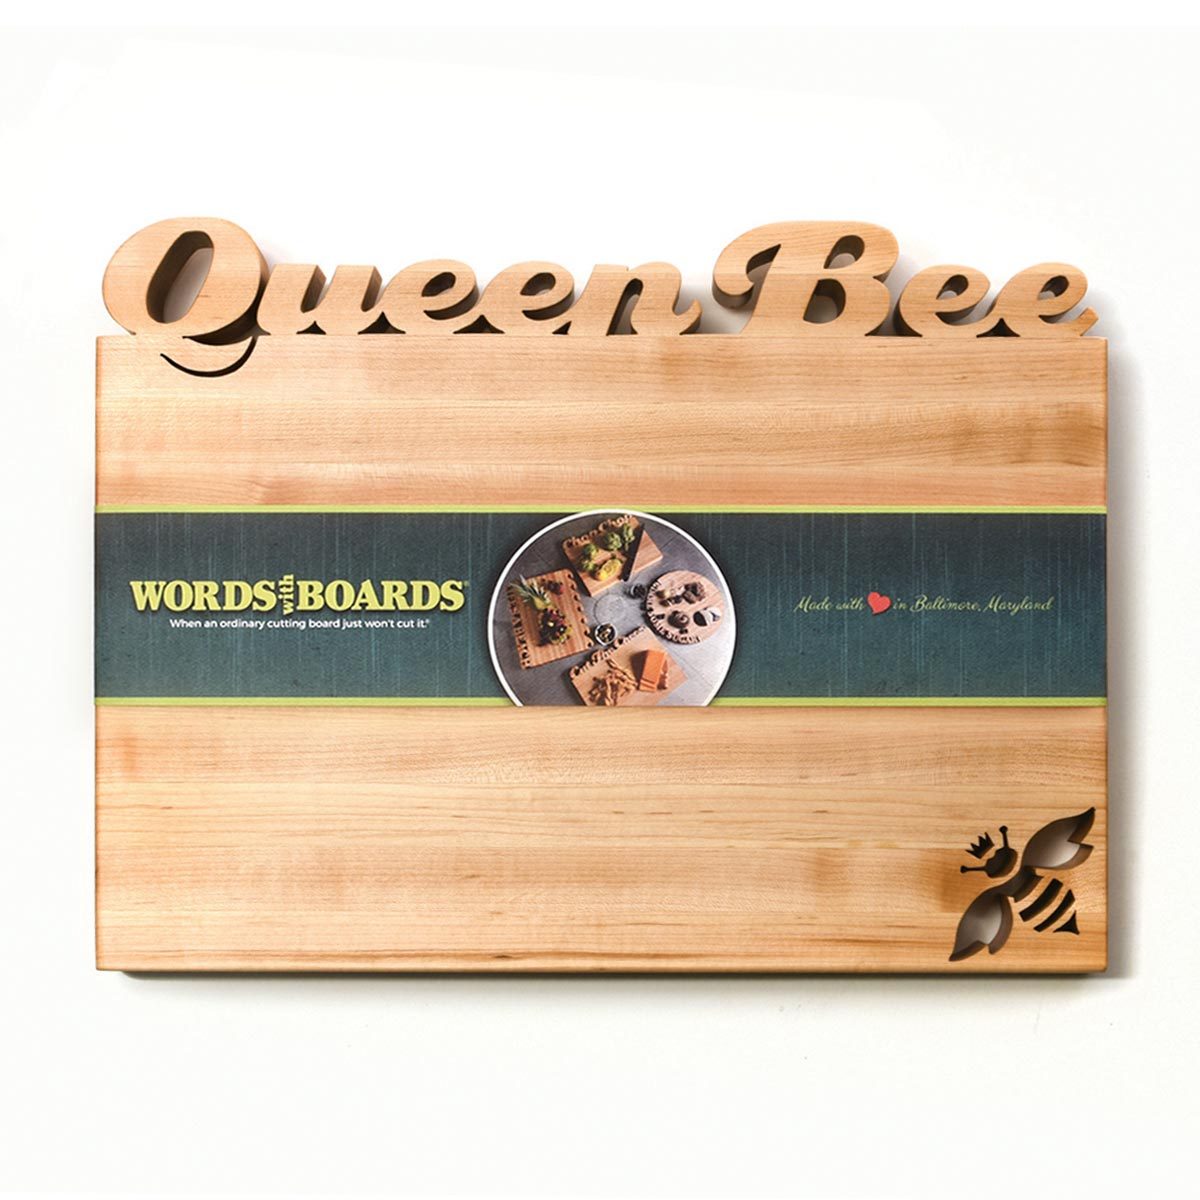 https://wordswithboards.com/cdn/shop/products/UNIQUE_WEDDING_GIFT_WOOD_CUTTING_BOARD-www.wordswithboards.com_1600x.jpg?v=1530126188